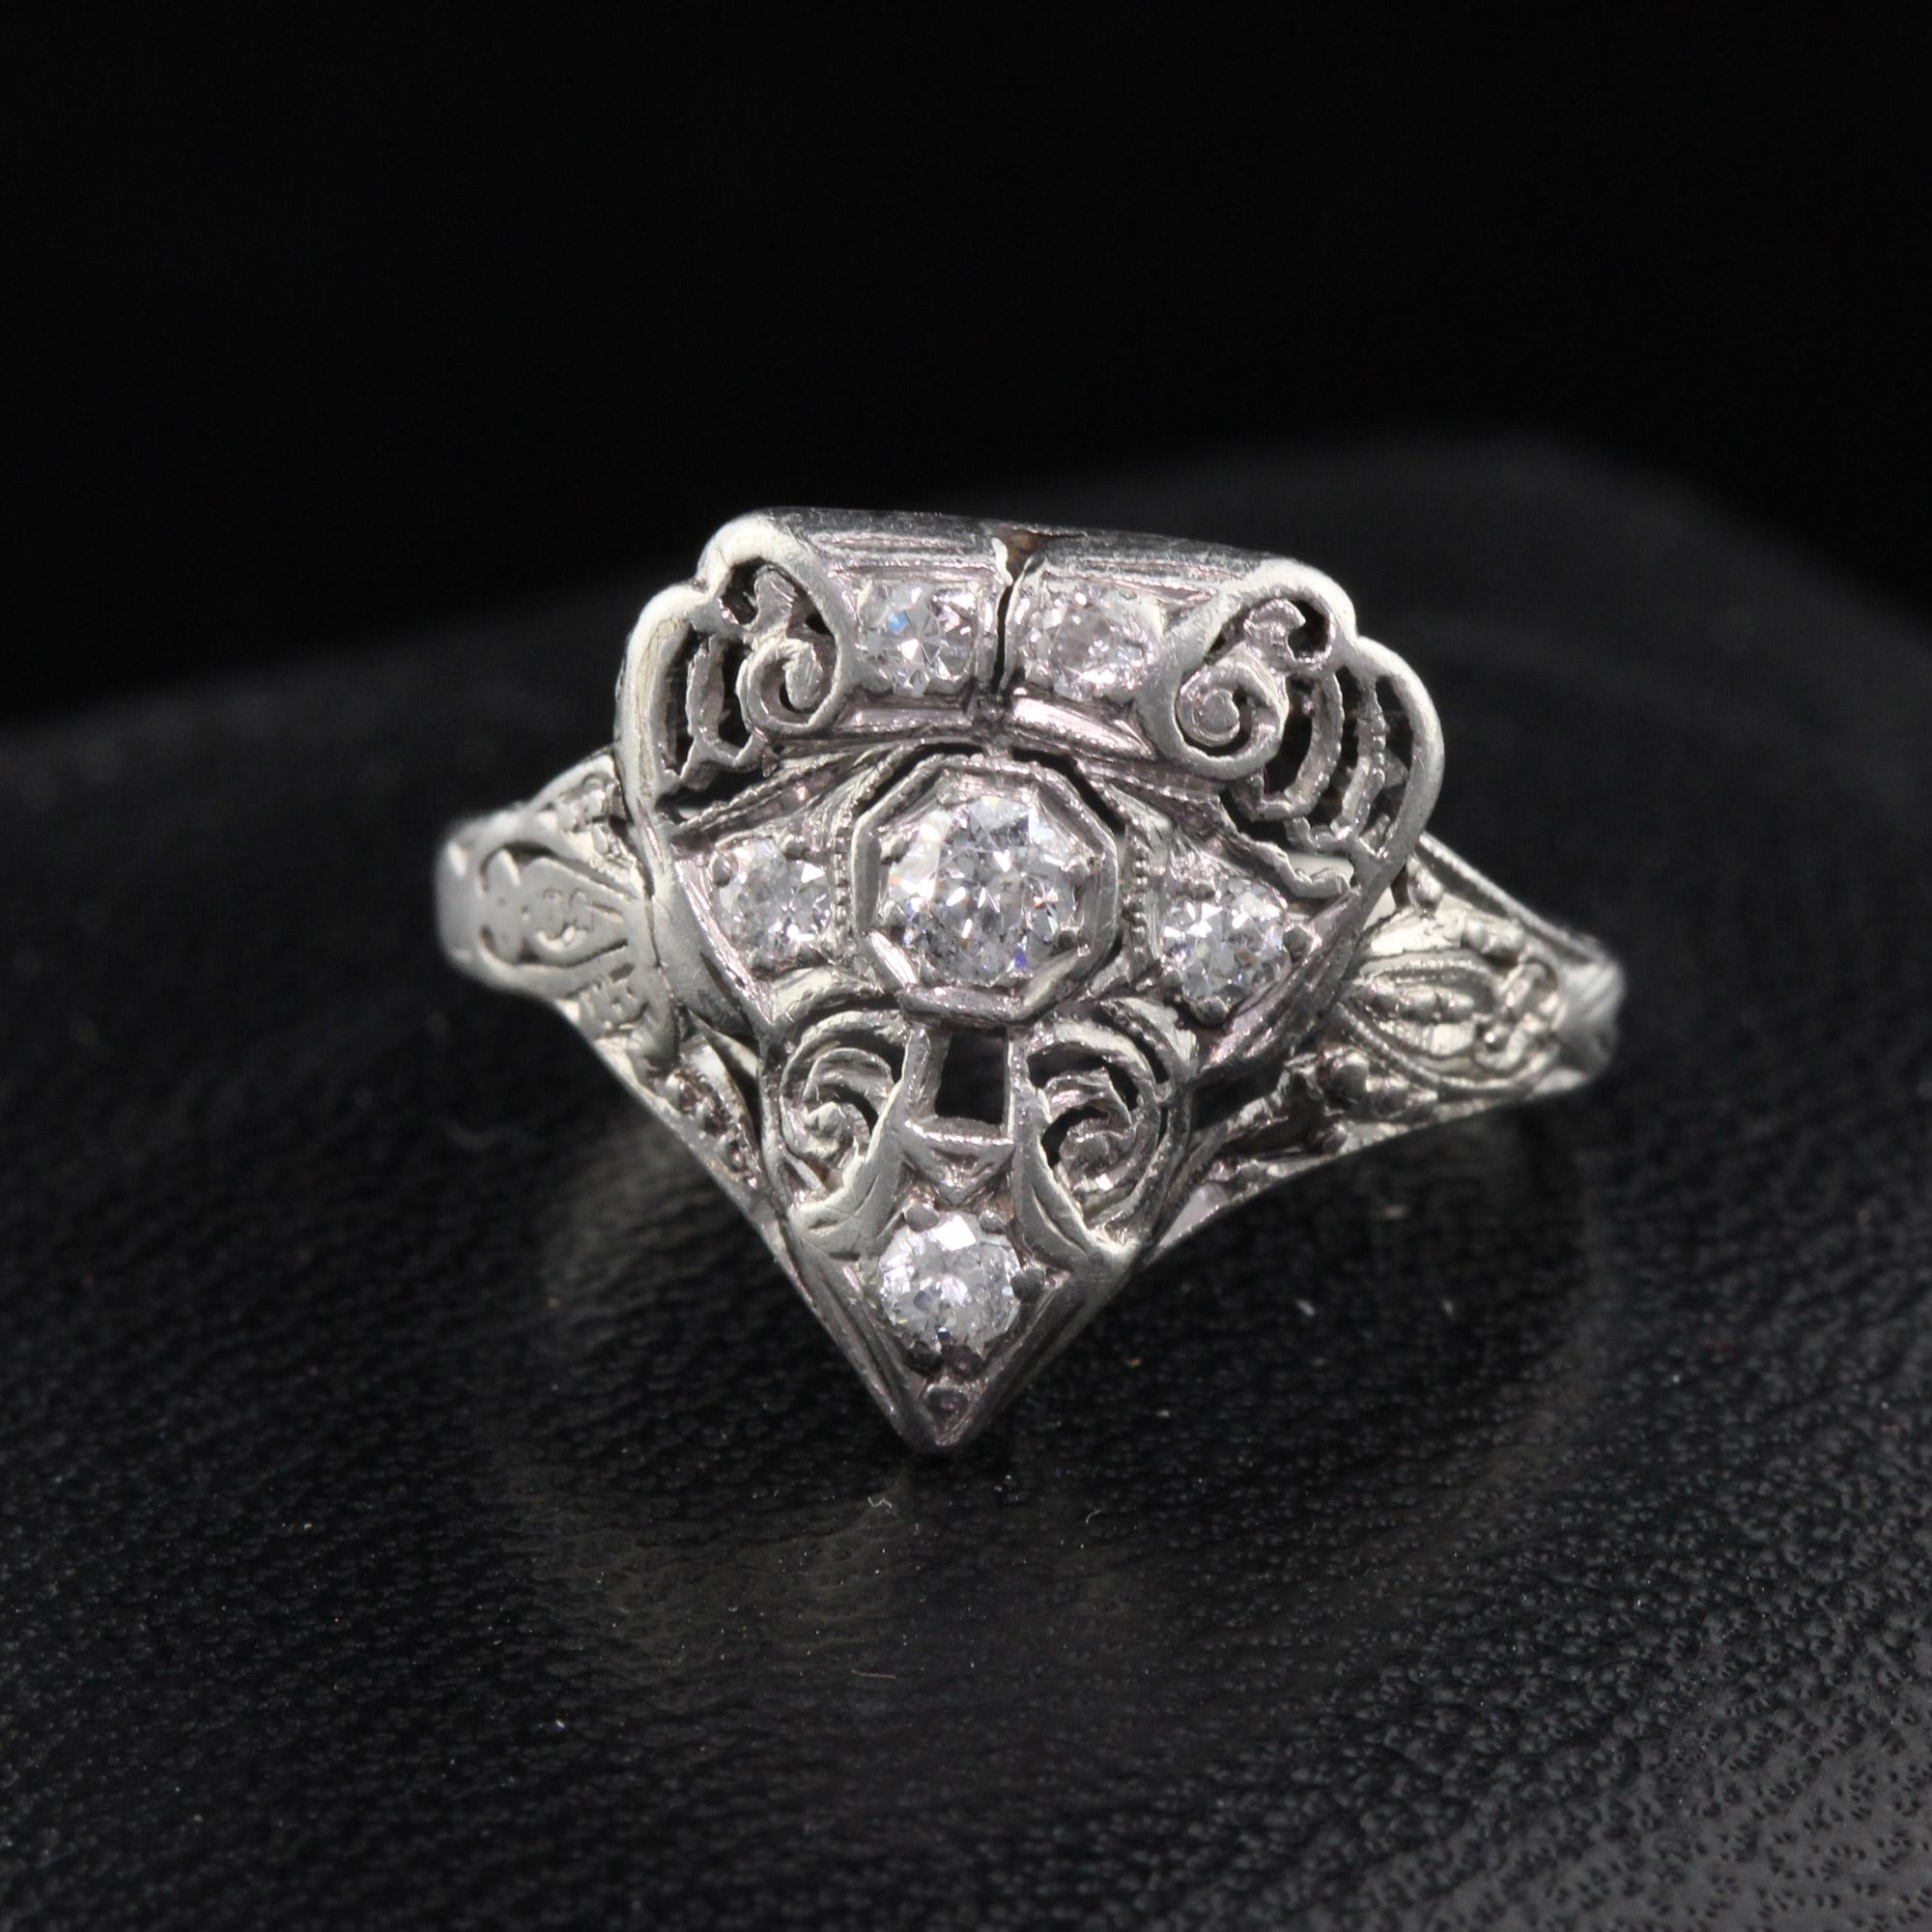 Antique Art Deco Platinum & Diamond Shield Shaped Ring With Filigree

#R0090

Metal: Platinum

Weight: 2.8 Grams

Total Diamond Weight: Approximately 0.15 cts

Diamond Color: H

Diamond Clarity: SI1

Ring Size: 4 (sizable)

This ring can be sized